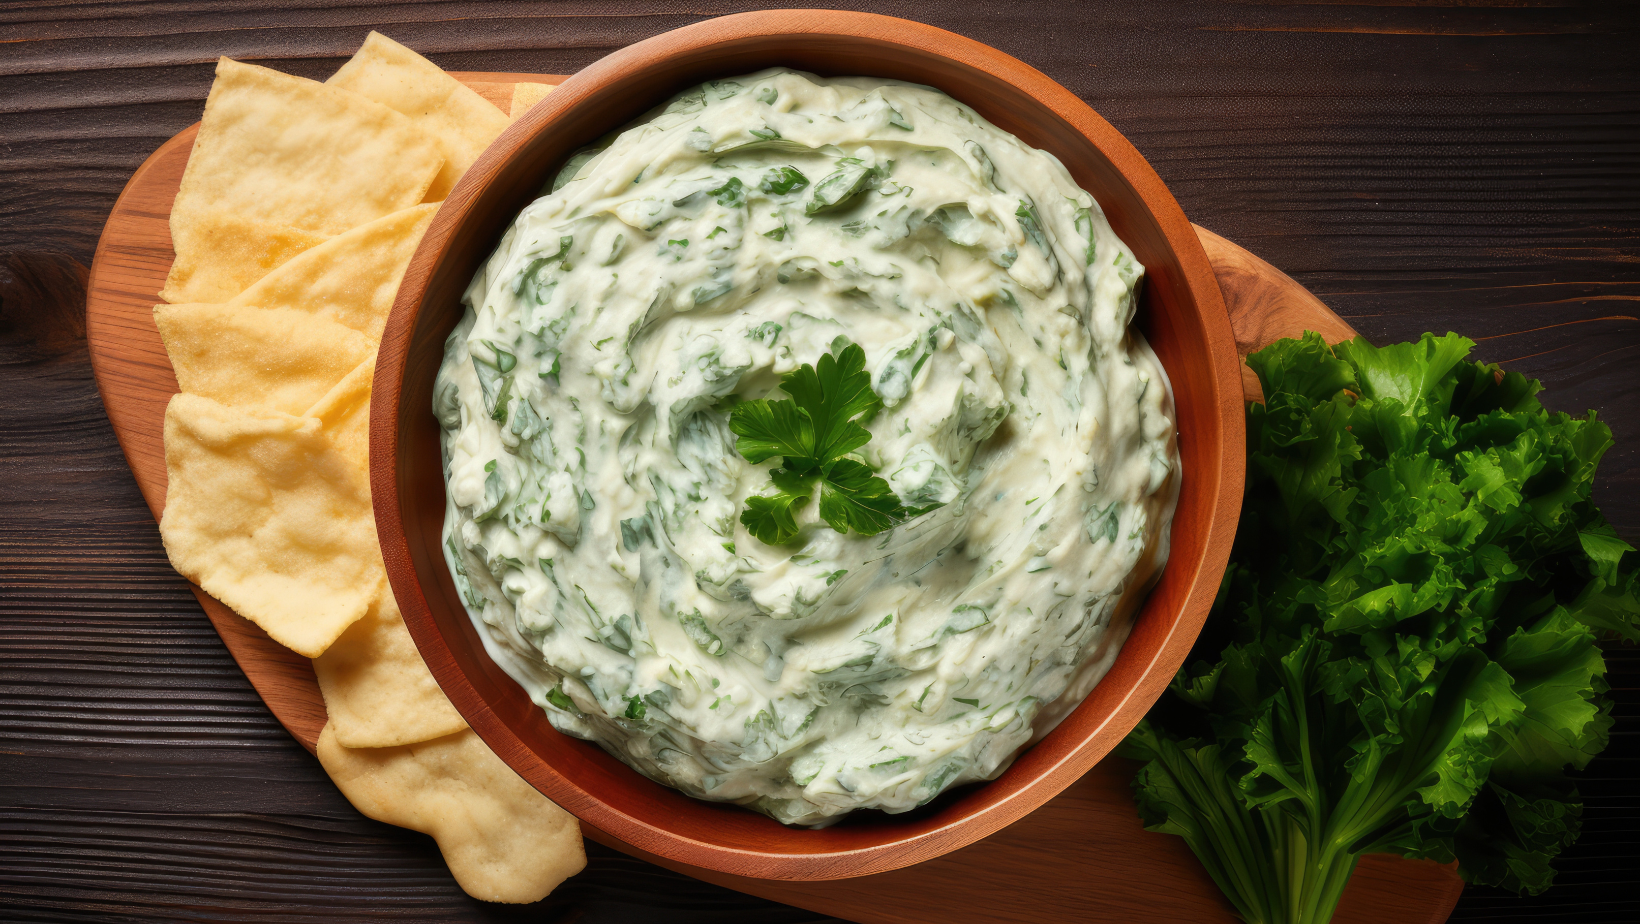 Top View, Vegan Spinach And Artichoke Dip On A Wooden Boardon White Background. Vegan Cooking,Artichoke Dishes,Spinach Recipes,Vegan Recipe Ideas,Vegan Dip Recipes.